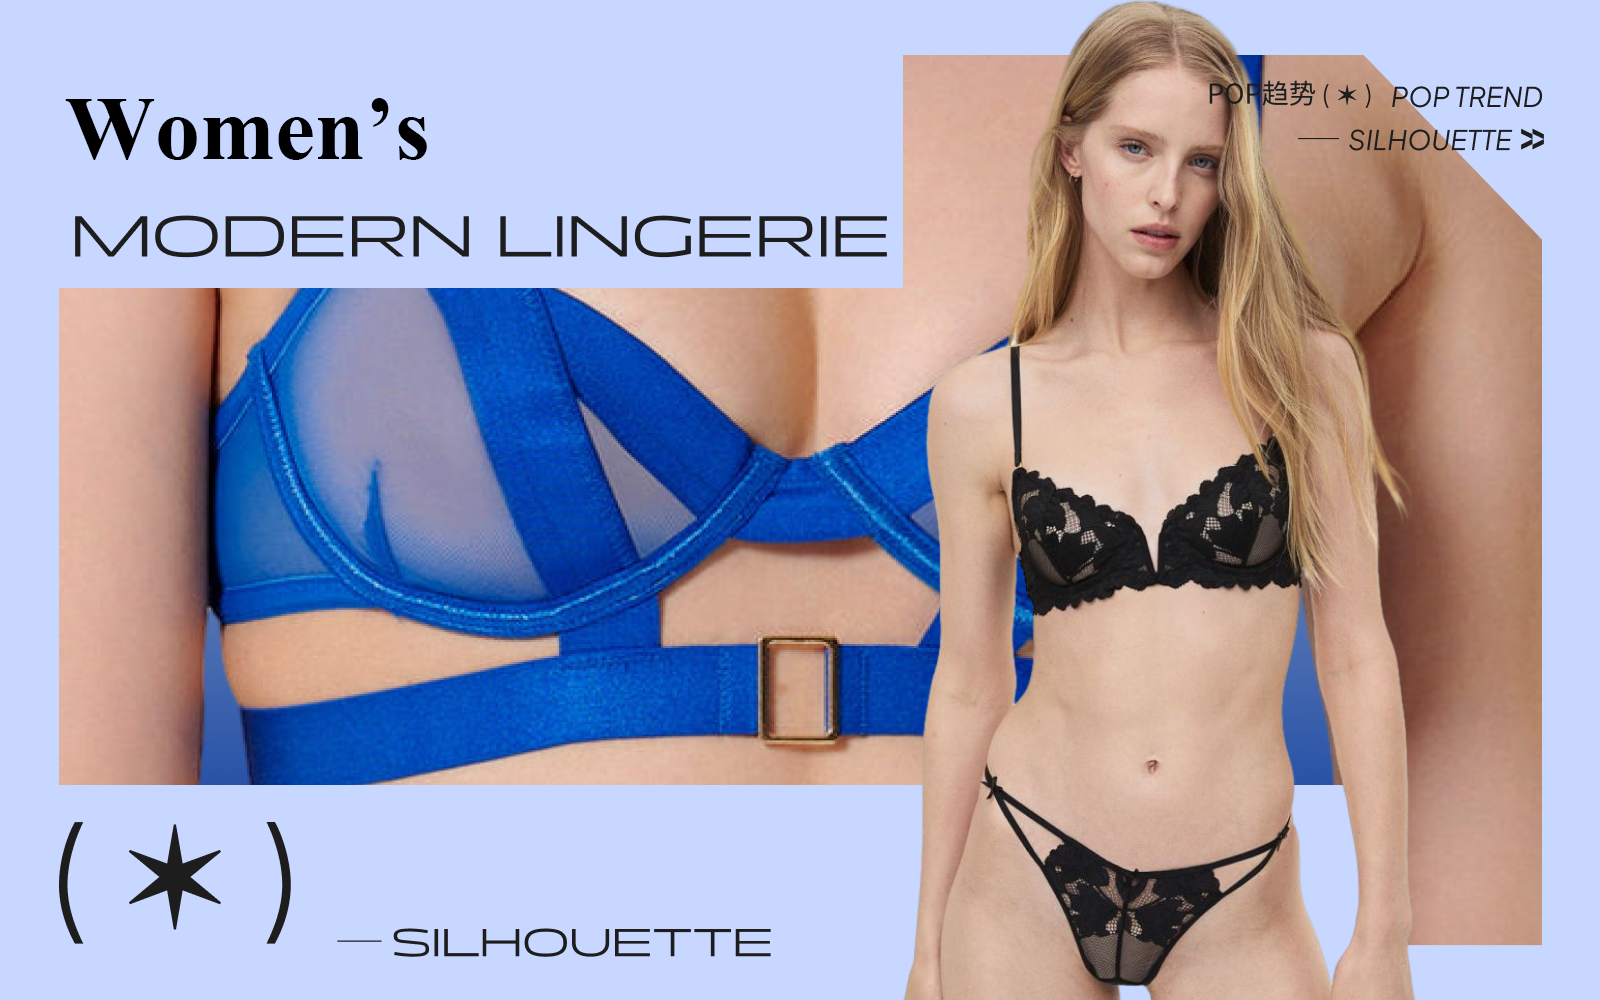 Exquisite Modern -- The Silhouette Trend for Women's Lingerie